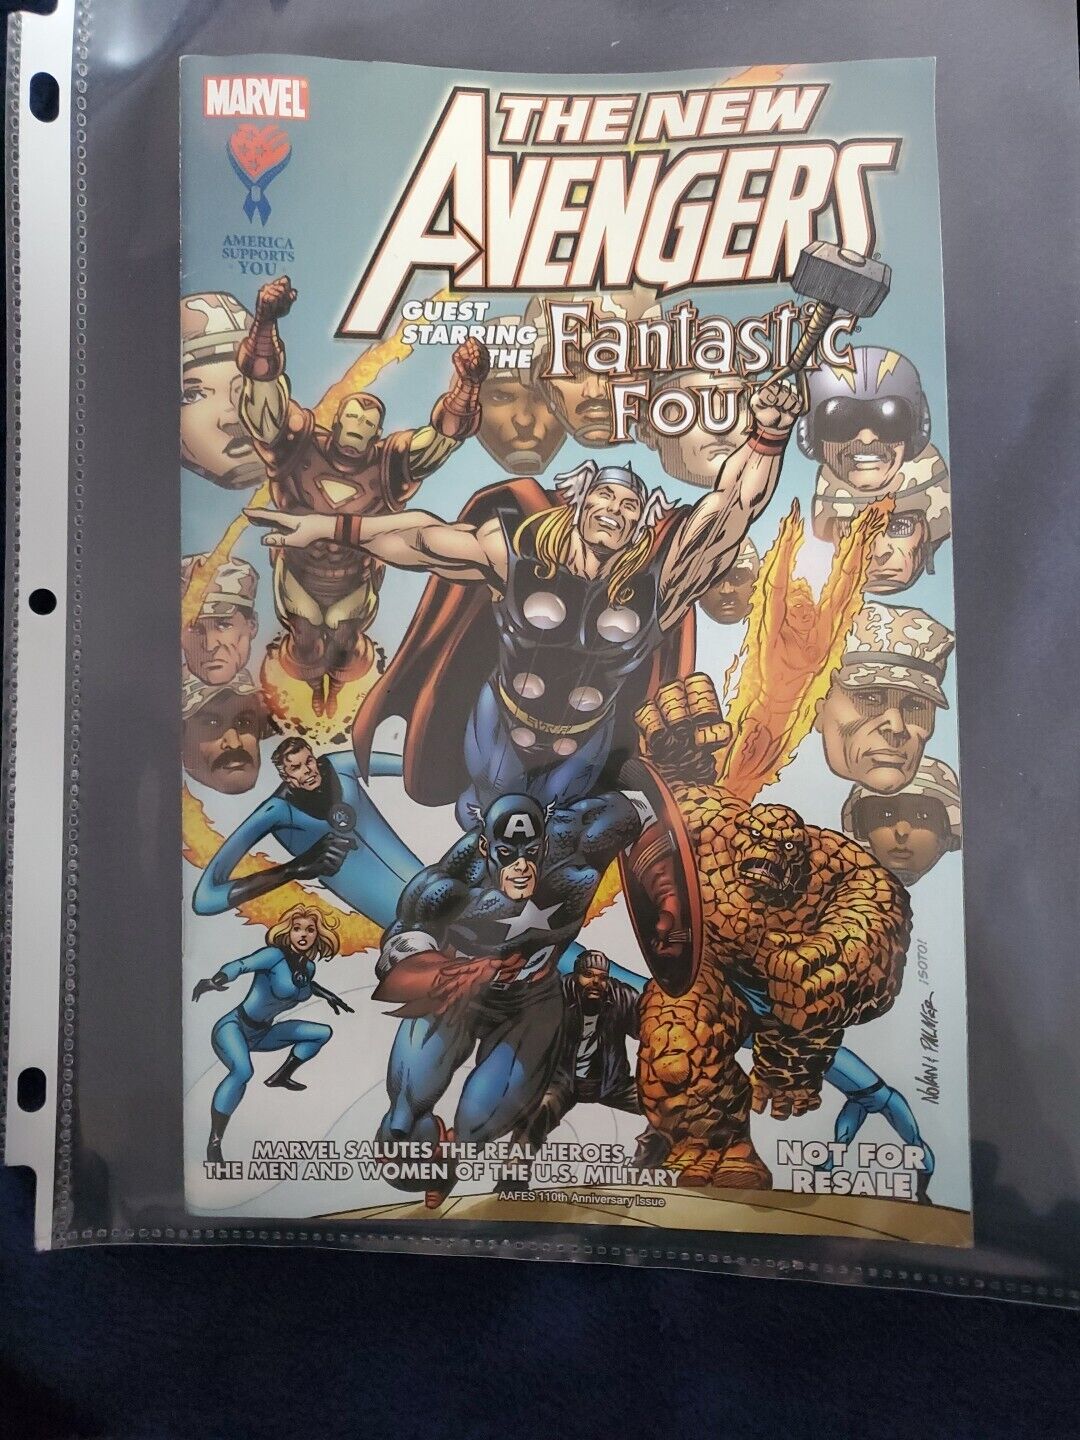 Marvel The New Advengers 2005 Guest Starring The Fantastic Four Comic